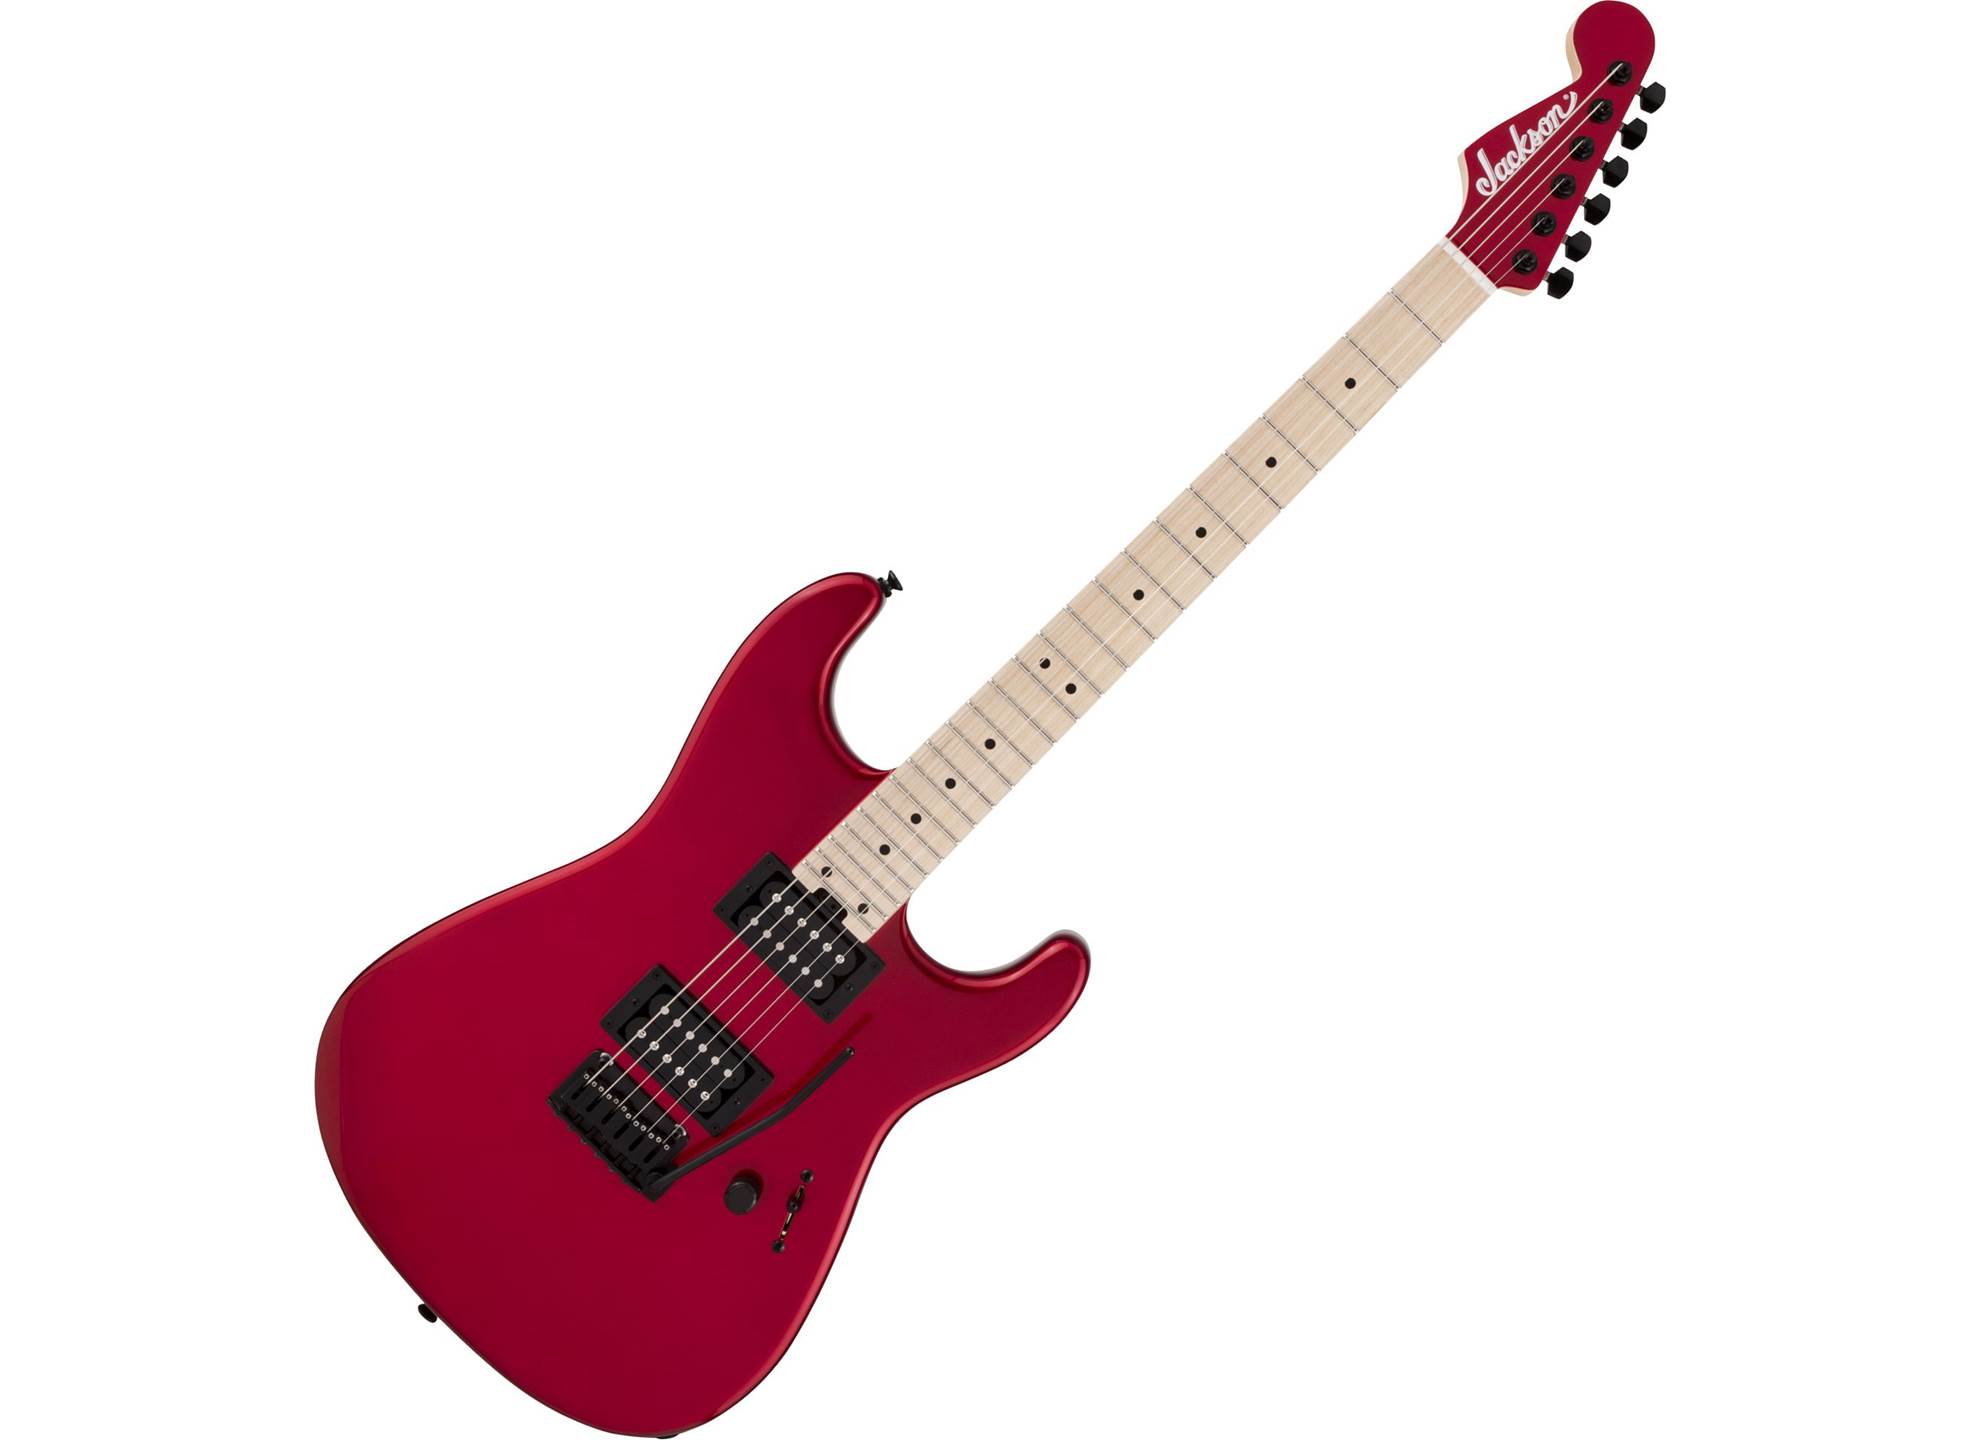 Pro Series Signature Gus G Candy Apple Red